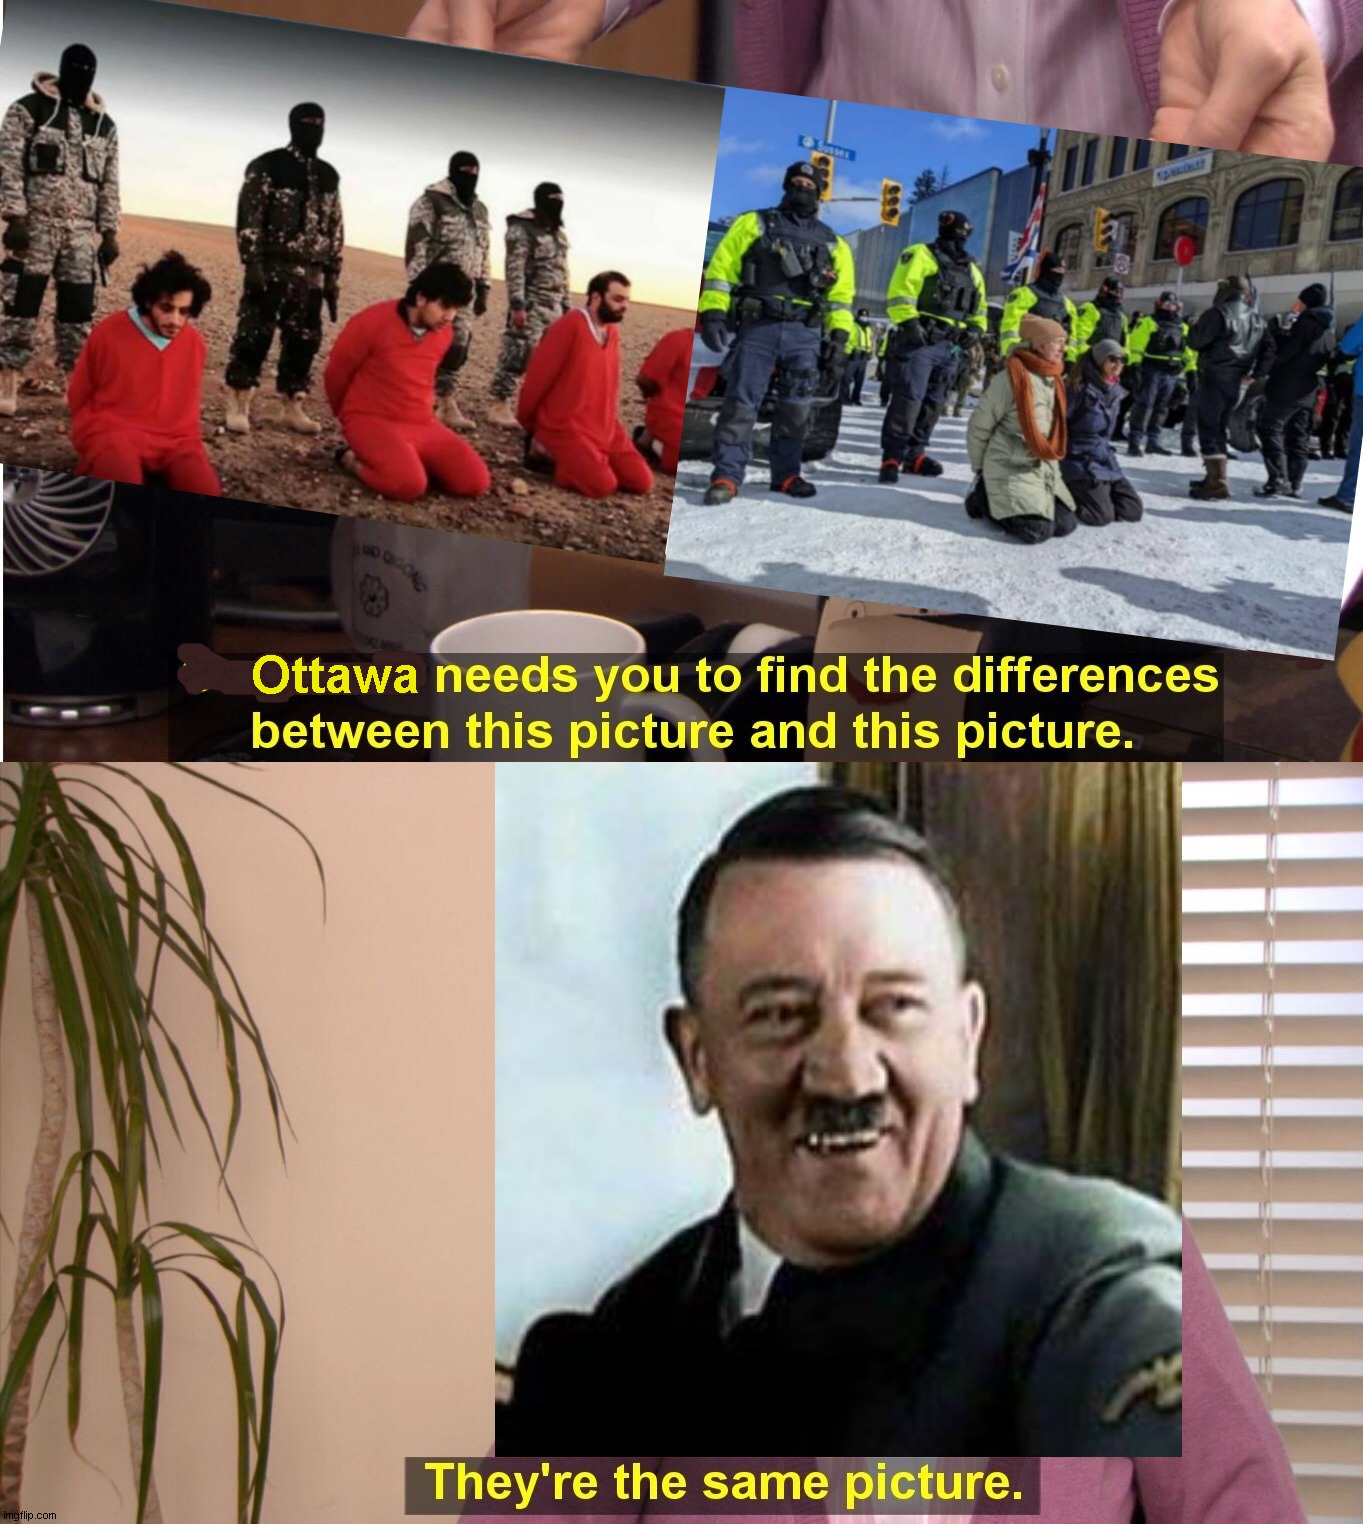 They're the Same Picture | Ottawa | image tagged in memes,they're the same picture,canada,ottawa,freedom,protests | made w/ Imgflip meme maker